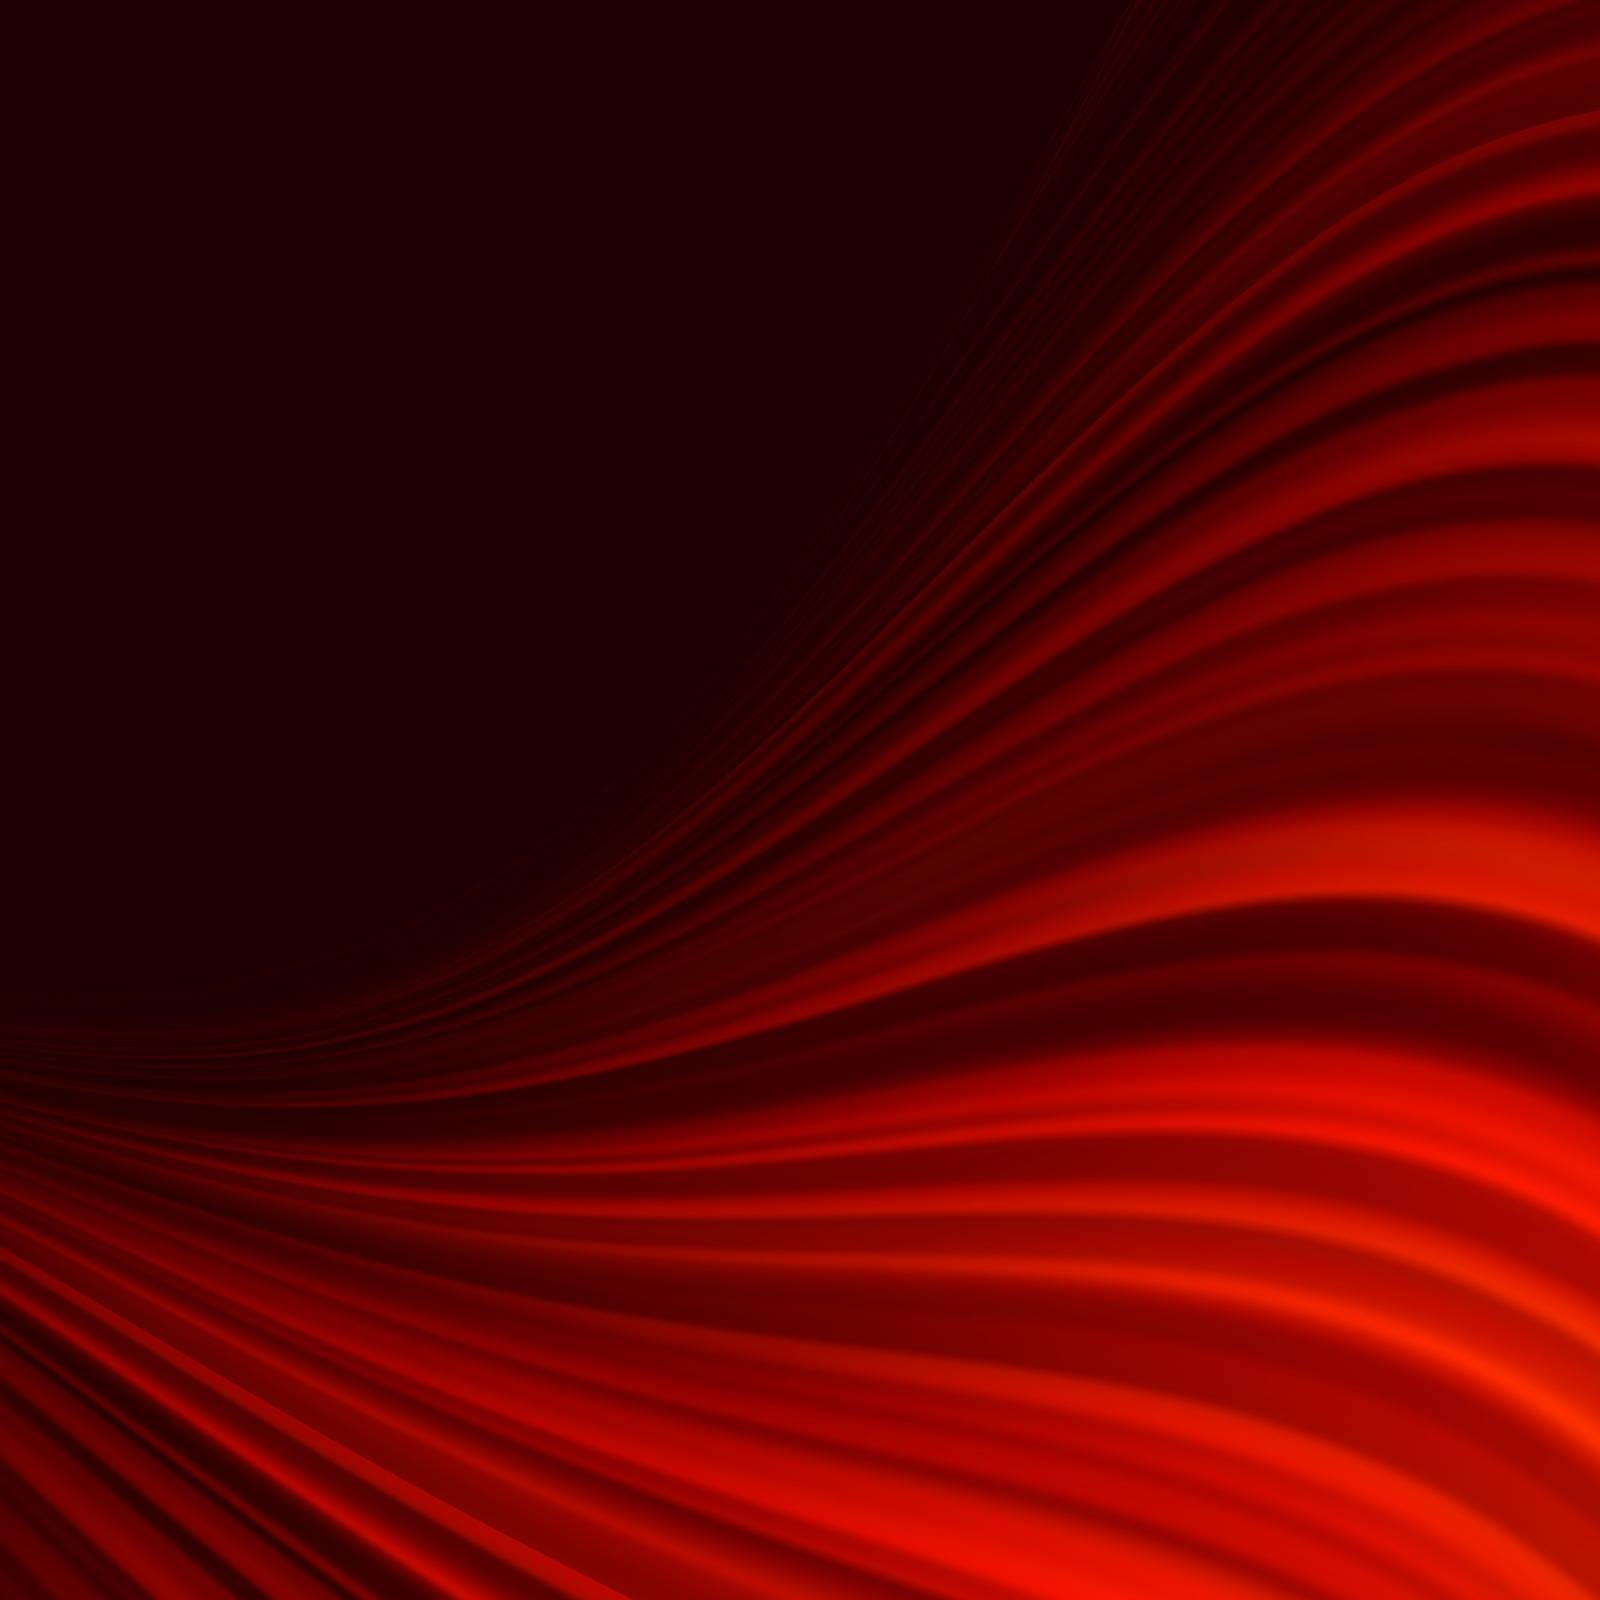 Abstract glow Twist background with golden flow. EPS 10 vector file included